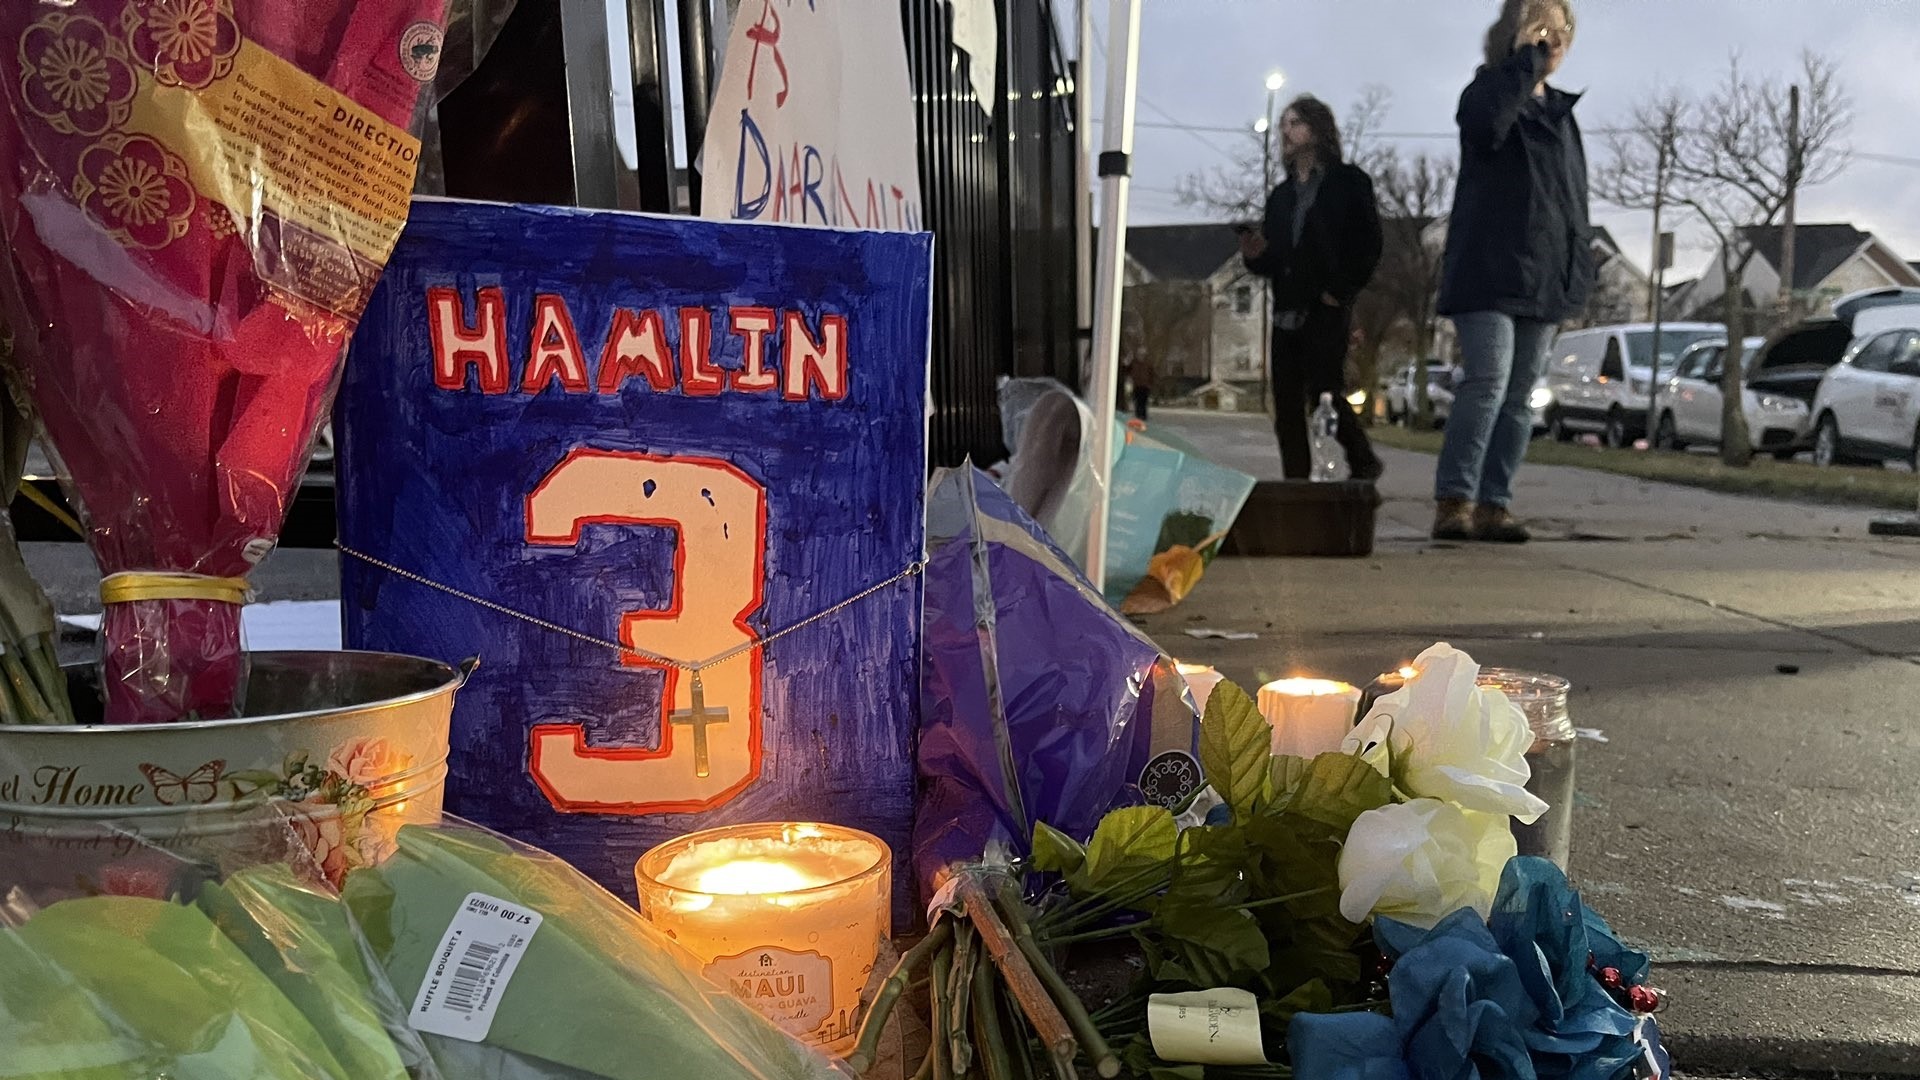 Fans, former players show support for Damar Hamlin after collapse | whas11.com